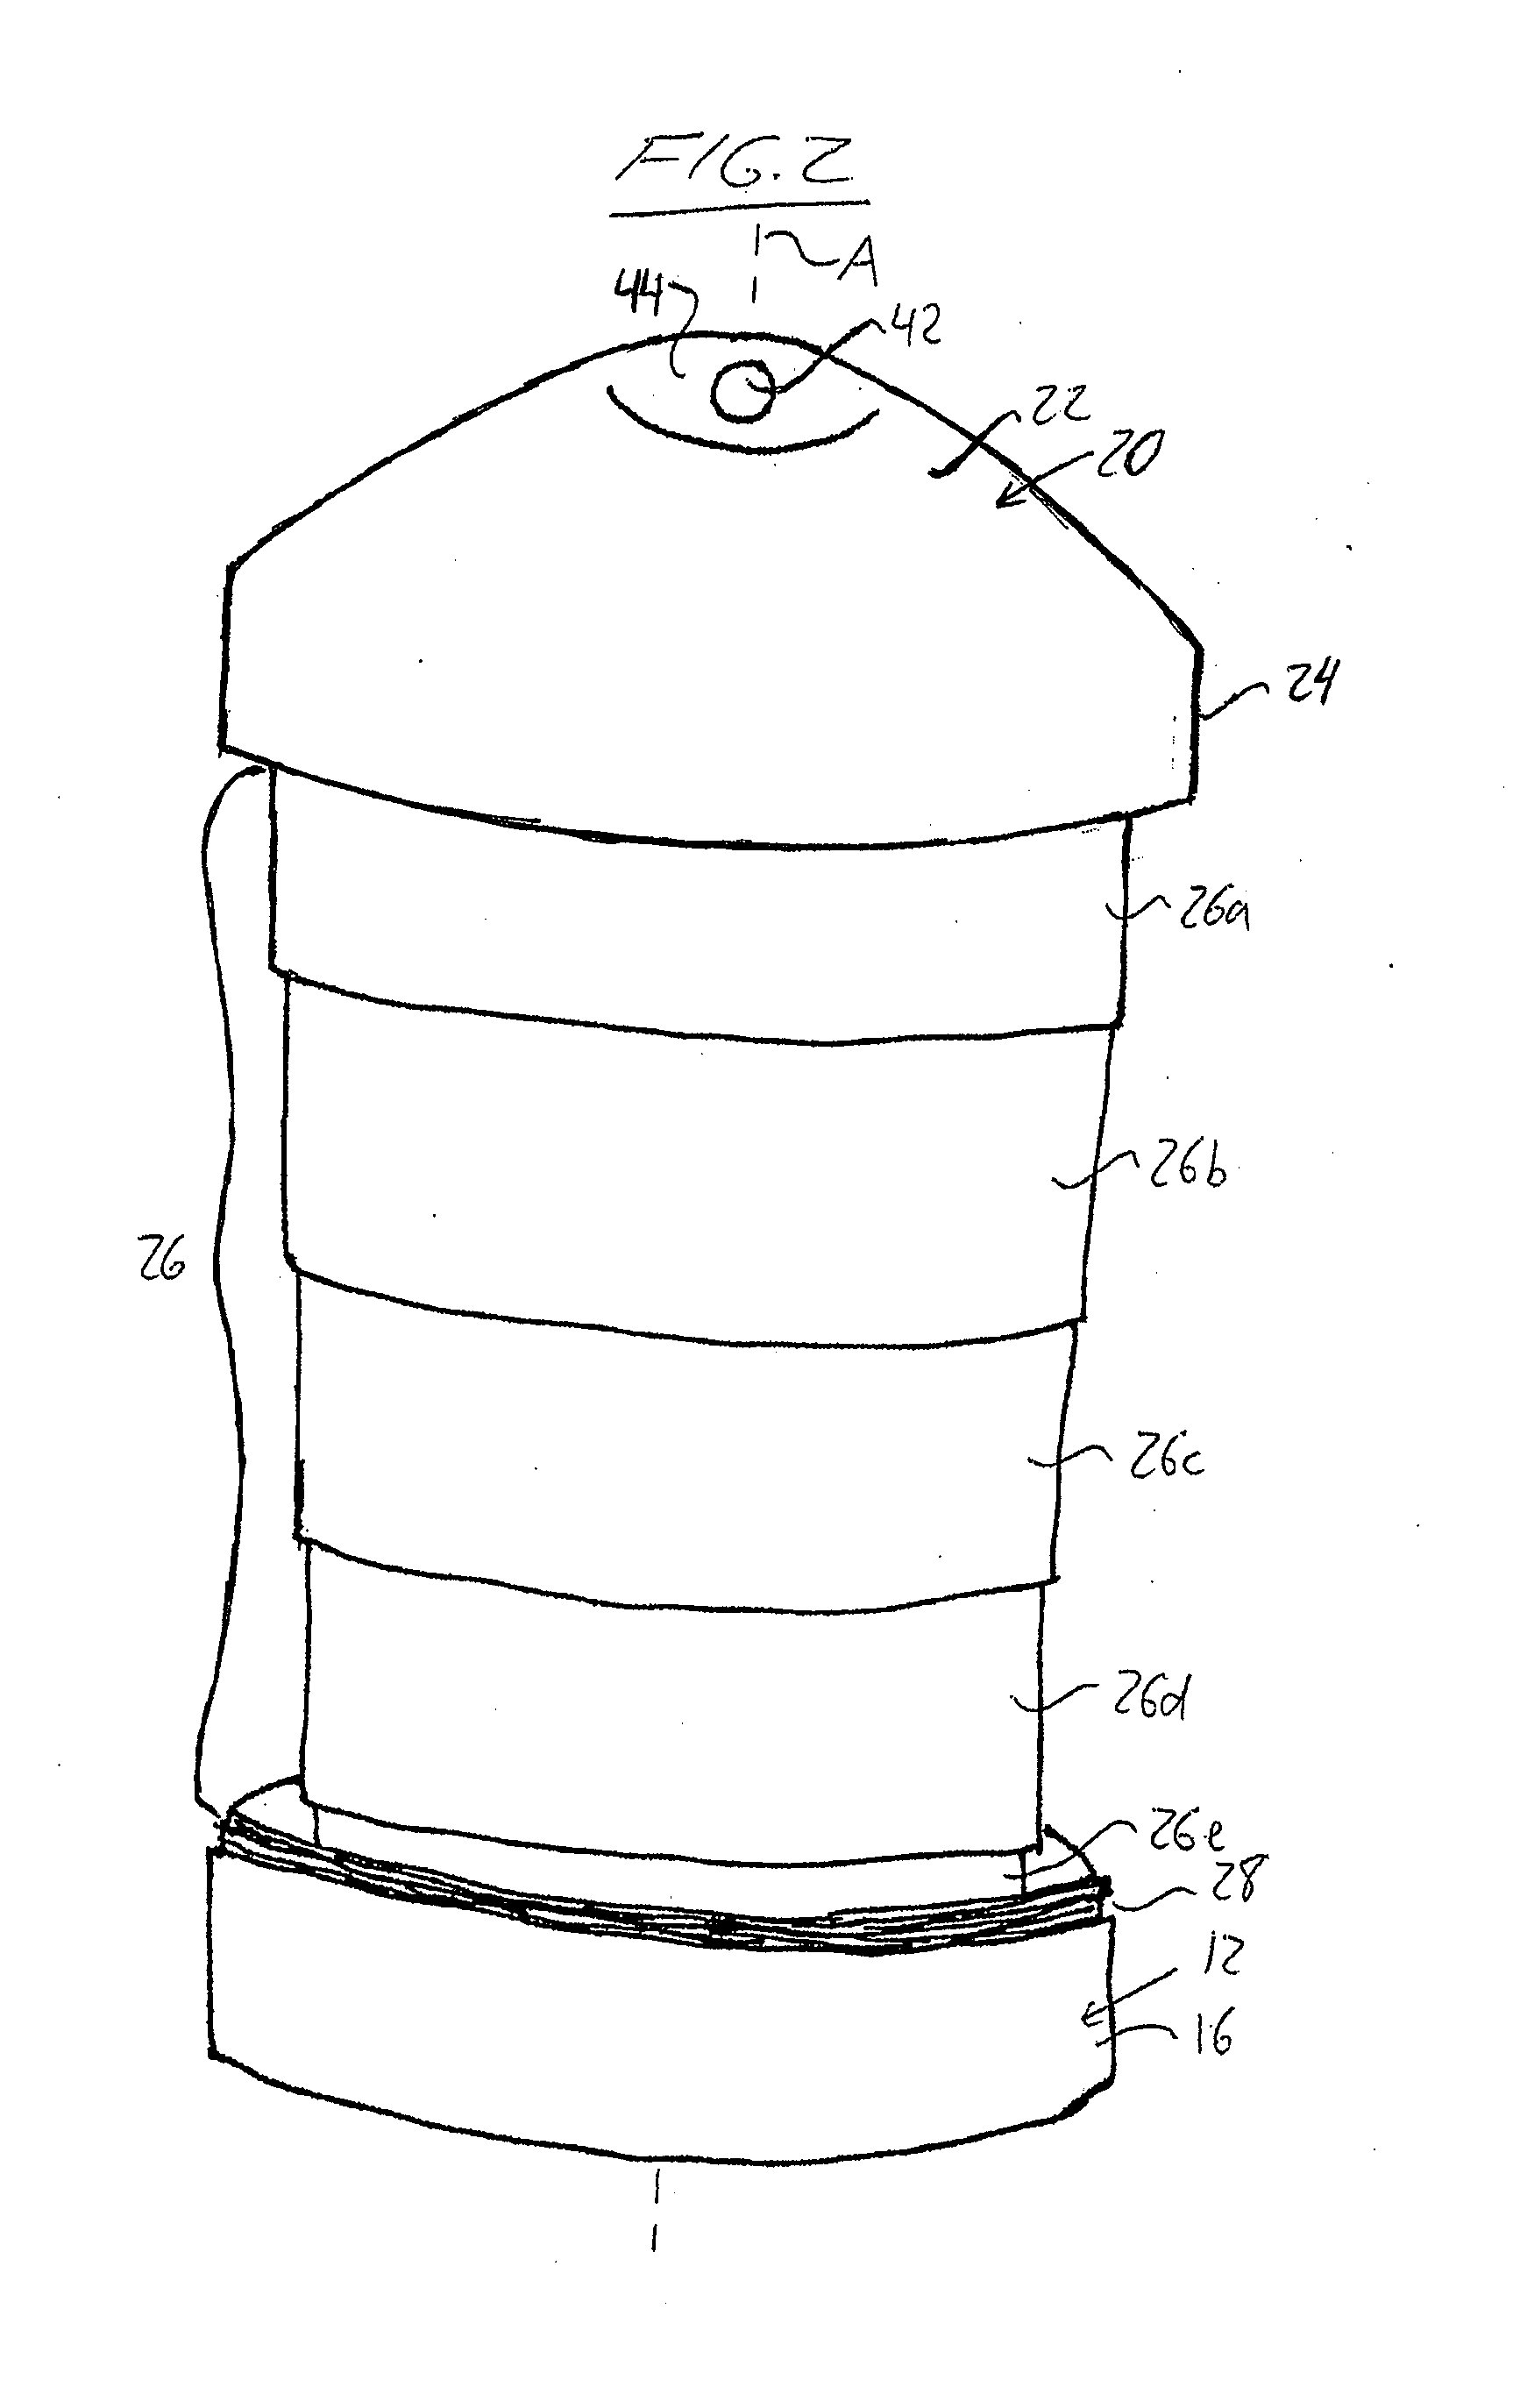 Scent Dispensing System with Enclosed Collapsible Scent Stick Holder and Tree Stand Delivery Features